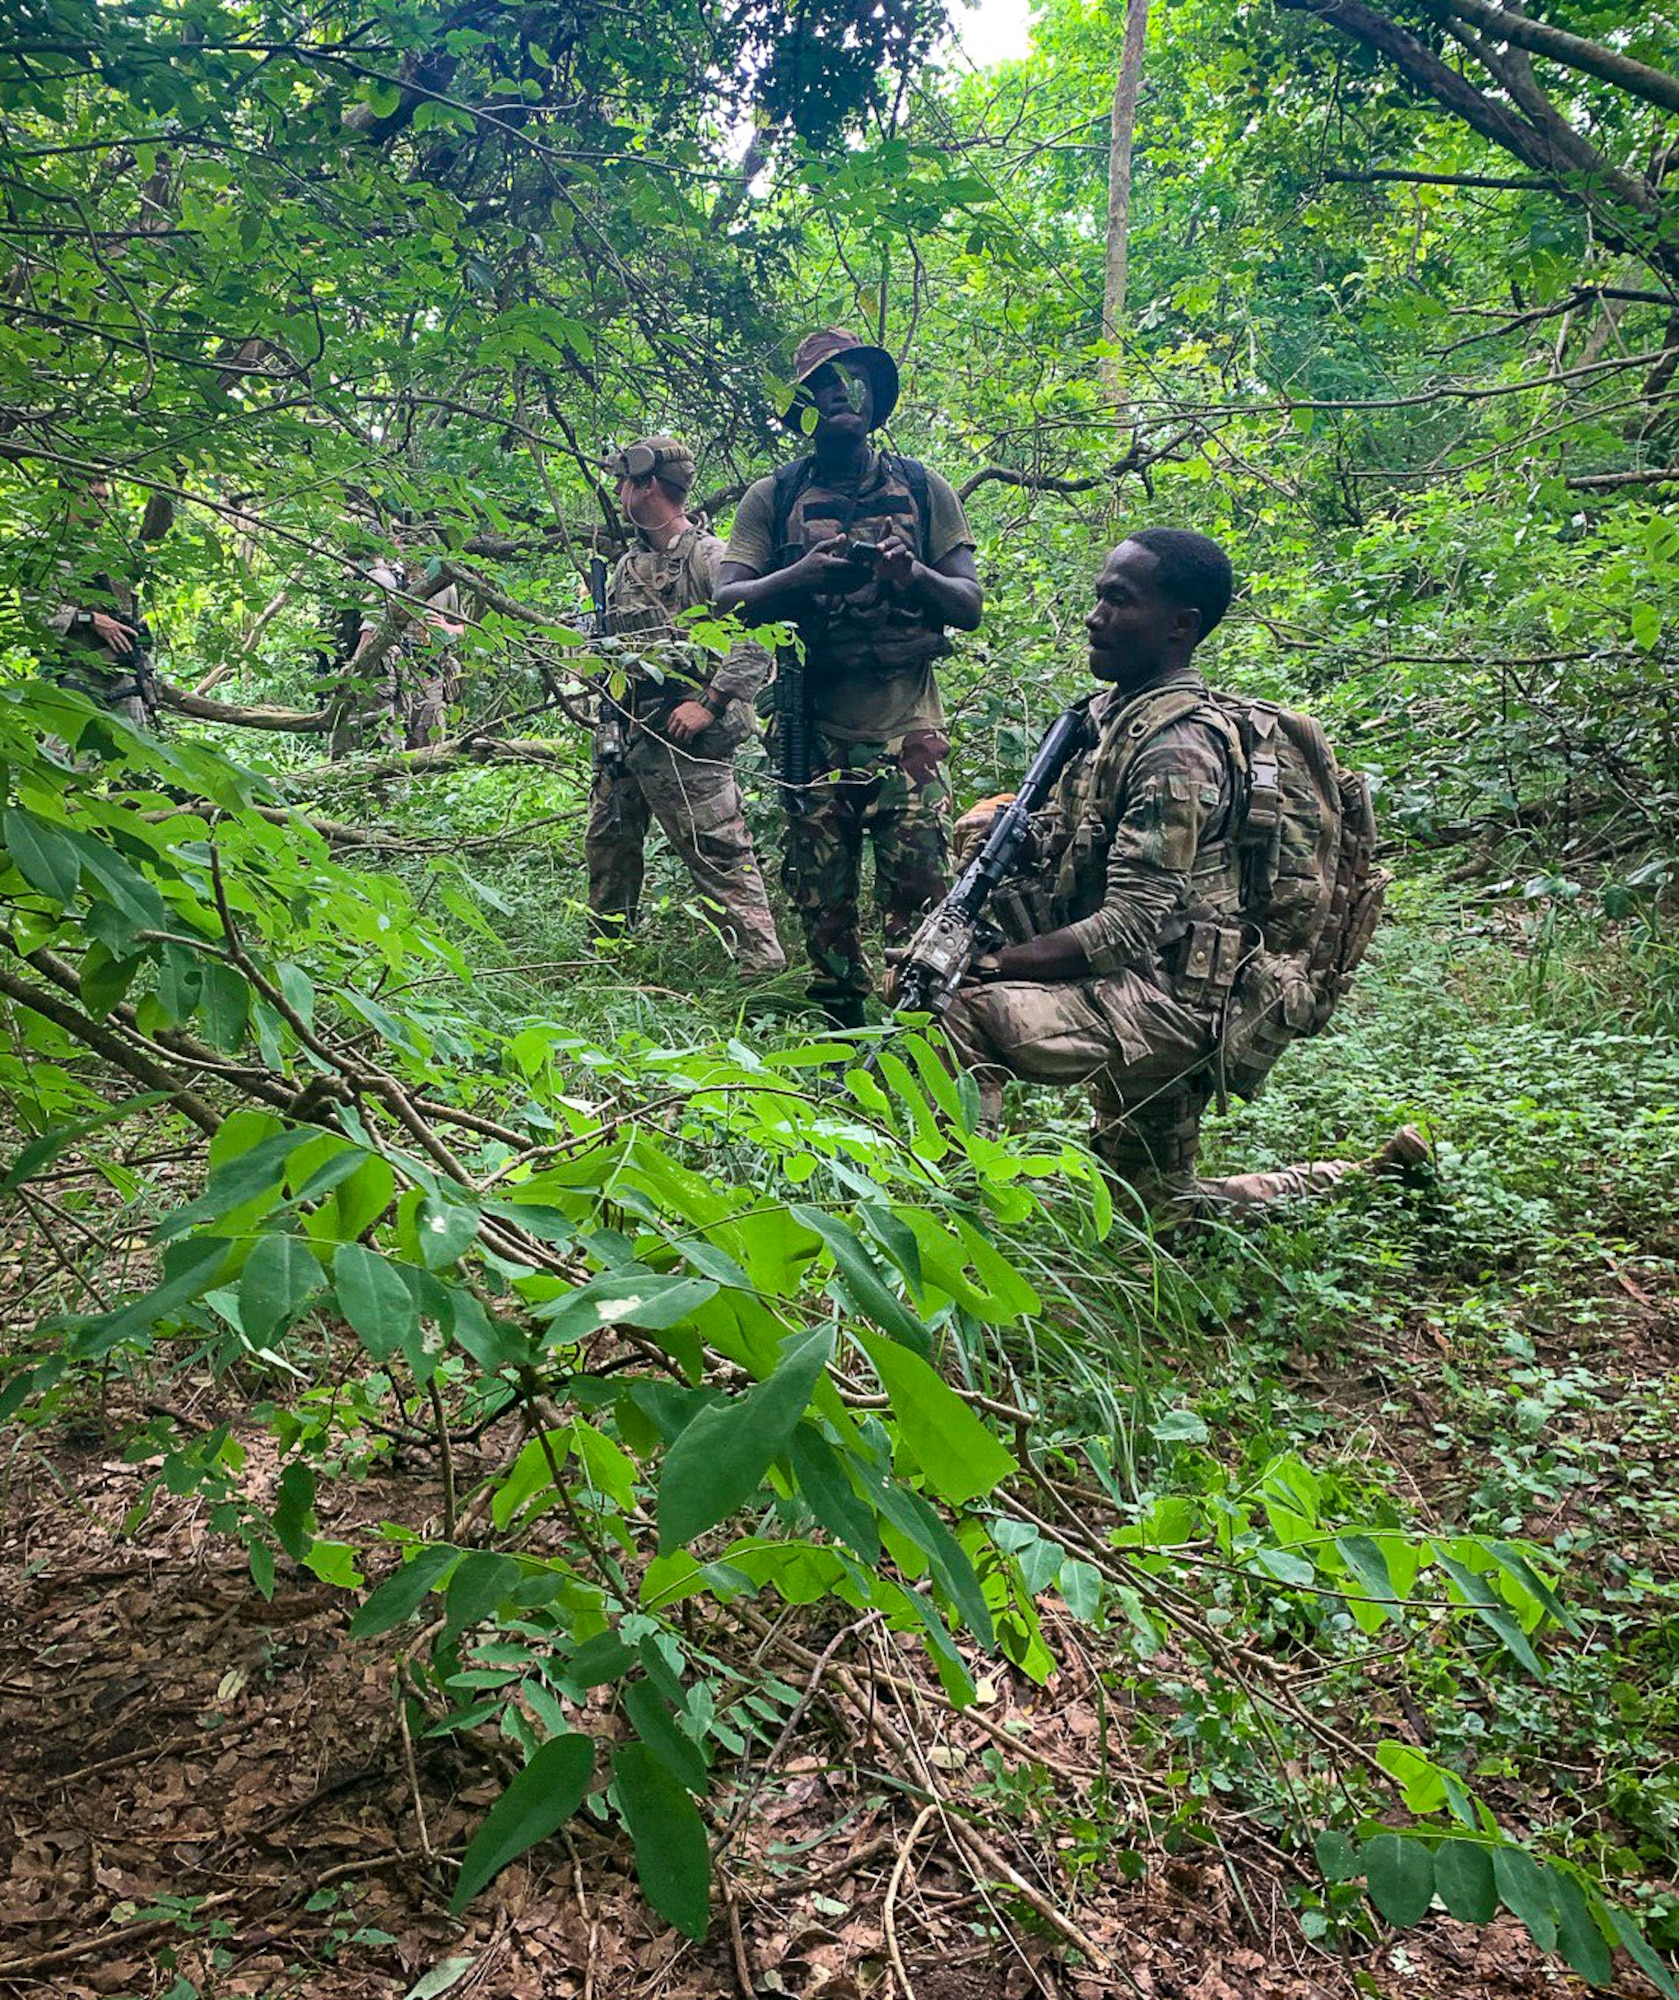 Kenyan military forces practice patrolling and tactical skills with the 822nd Base Defense Squadron at Camp Simba Manda Bay, Kenya, June 18, 2020. The interoperability between the KMF and the 822d BDS helps improve tactical skills, and improve overall security for both forces.  (Courtesy photo)